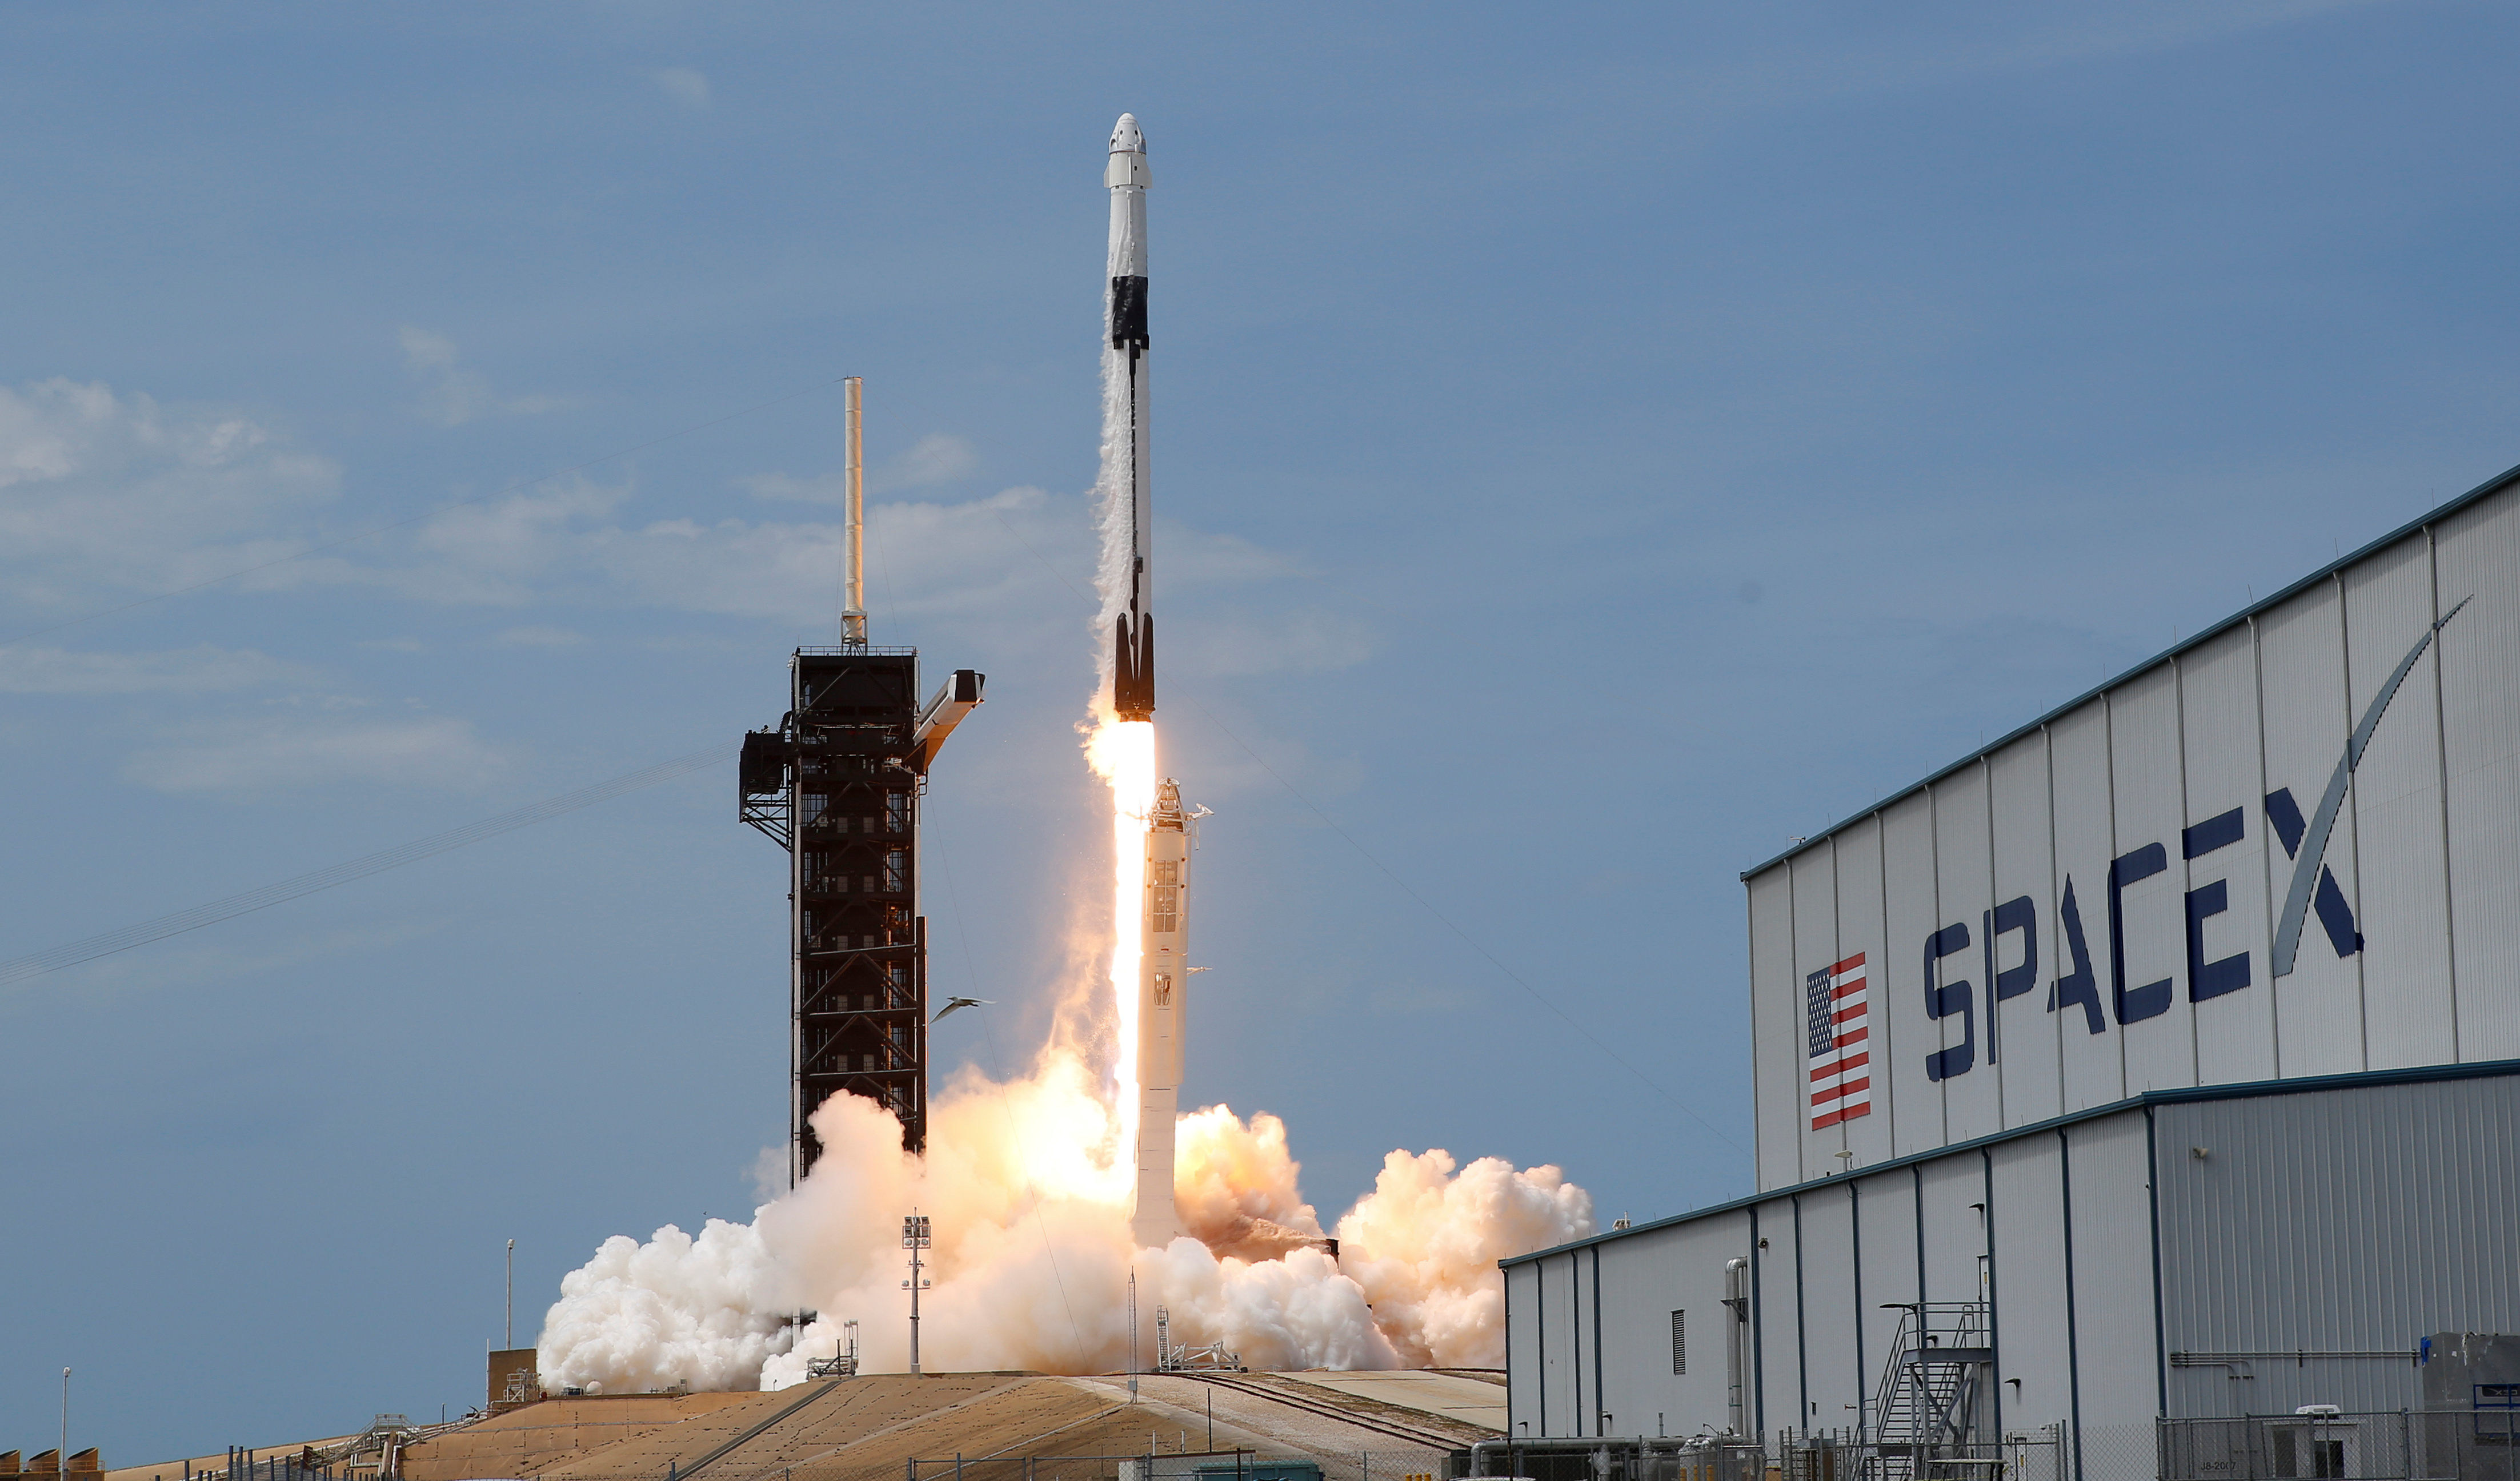 A SpaceX Falcon 9 rocket and Crew Dragon spacecraft carrying NASA astronauts Douglas Hurley and Robert Behnken lifts off during NASA's SpaceX Demo-2 mission to the International Space Station from NASA's Kennedy Space Center in Cape Canaveral, Florida, US, on May 30, 2020. Photo: Reuters